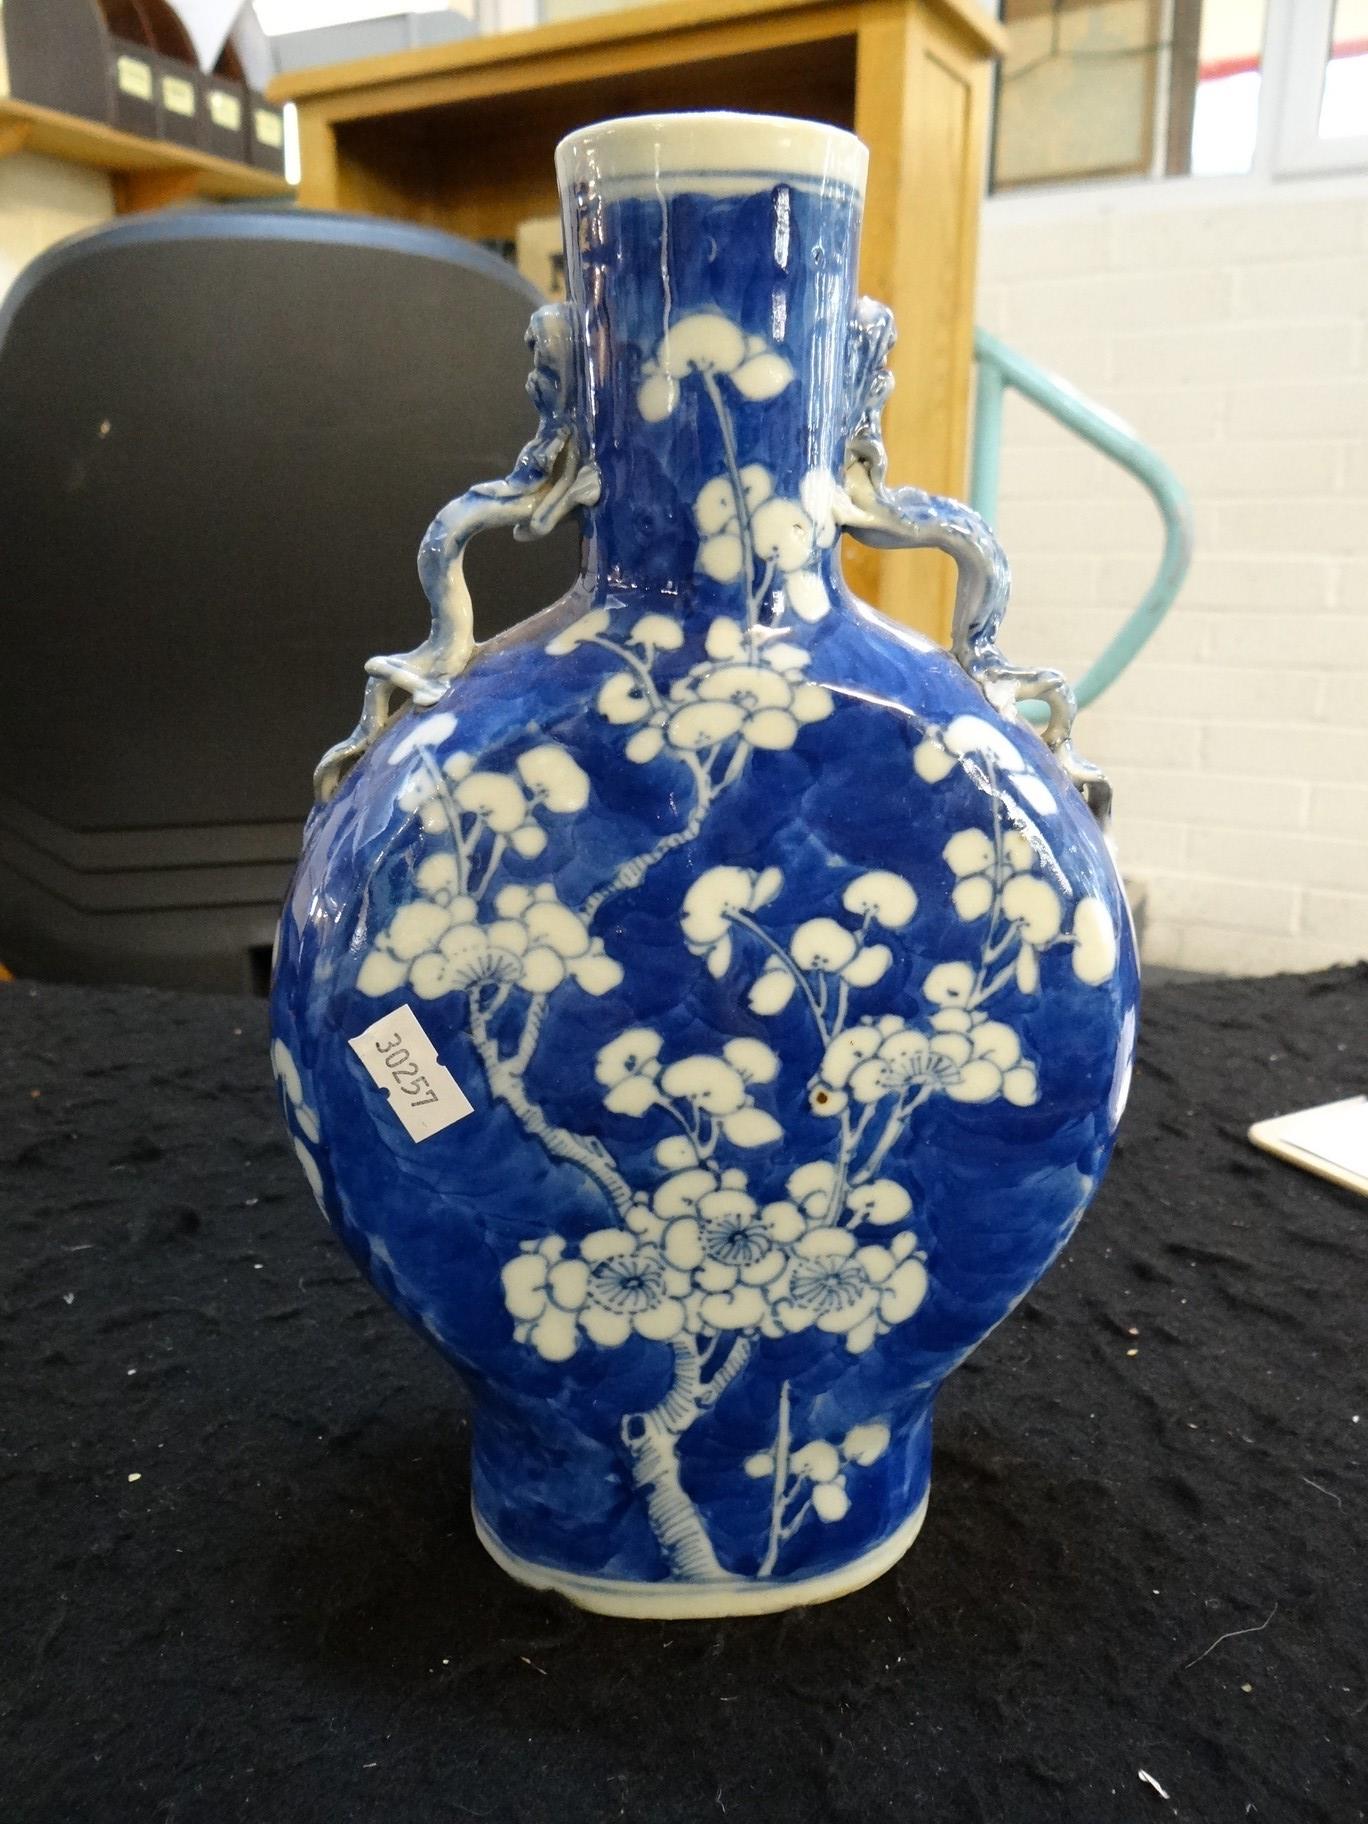 19th century Chinese export porcelain blue and white moon flask, depicting flower and prunus - Image 8 of 12